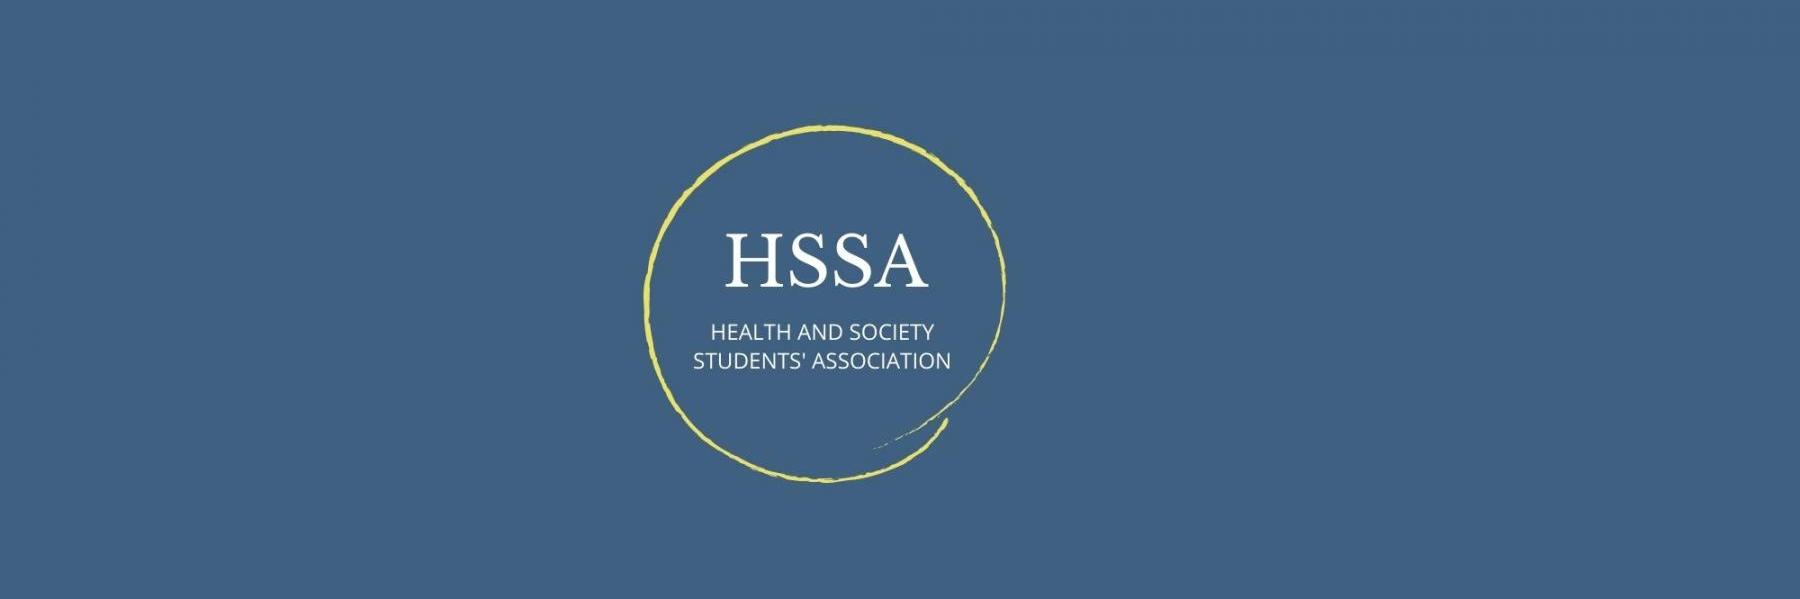 HSSA Health and Society Student's association